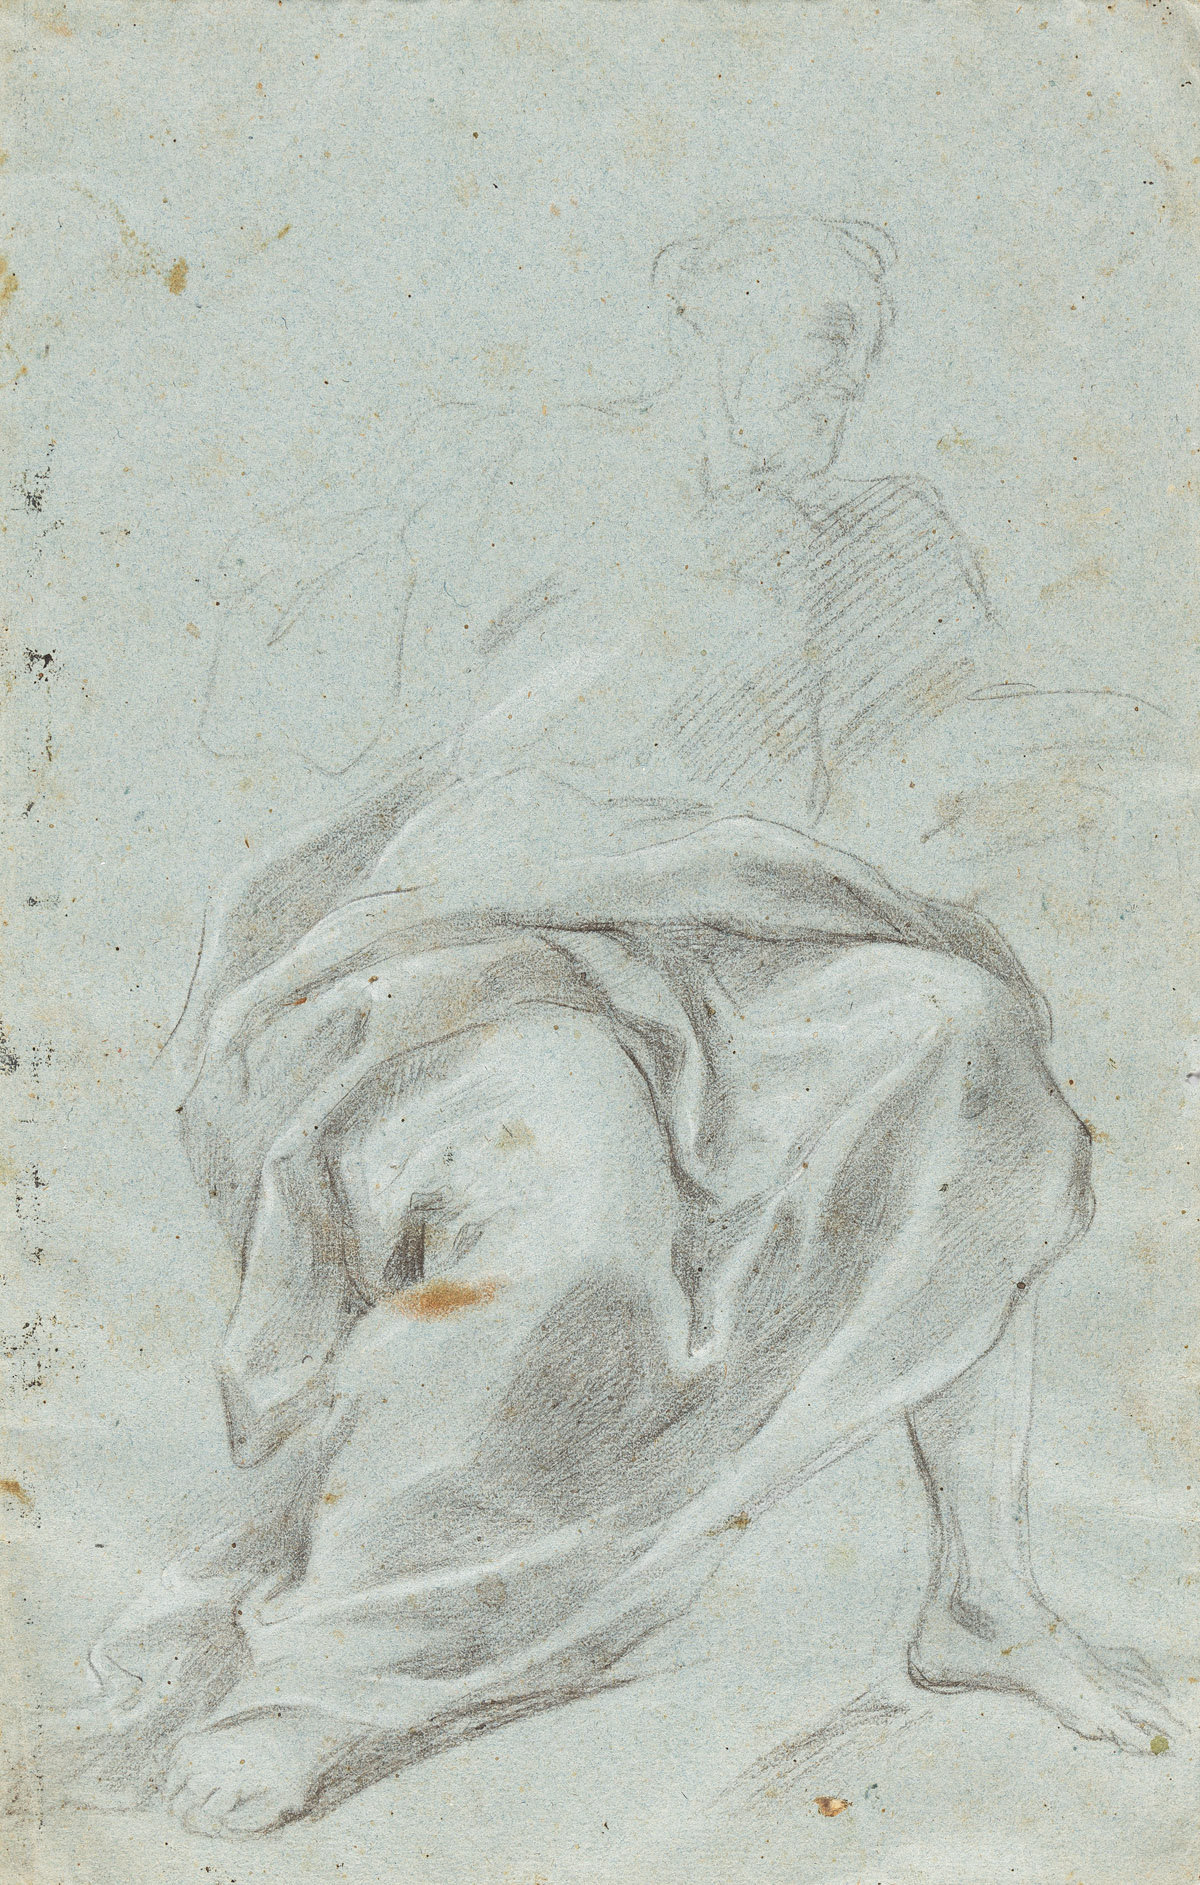 ANTOINE COYPEL (Paris 1661-1722 Paris) A Kneeling Woman with Outstretched Arms * Figure with a Robe.